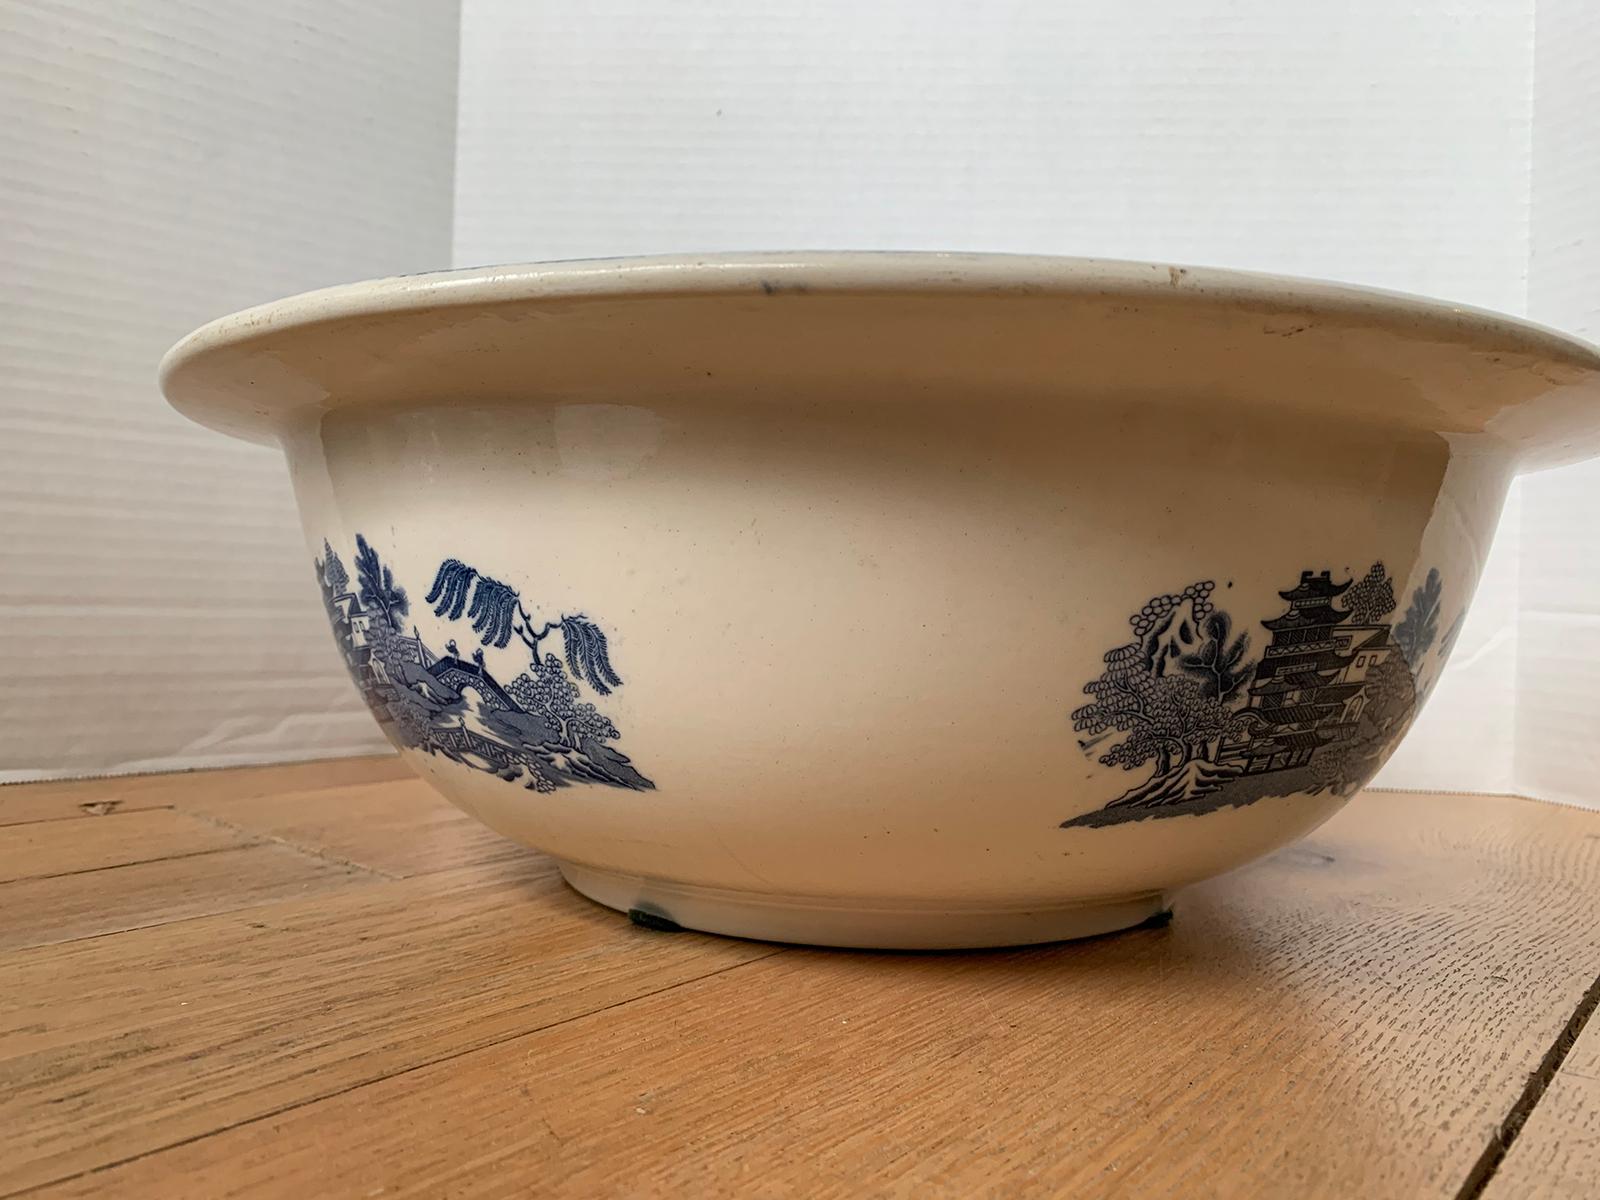 English Blue Willow Porcelain Bowl by Wedgwood, Impressed Mark, circa 1880 For Sale 2